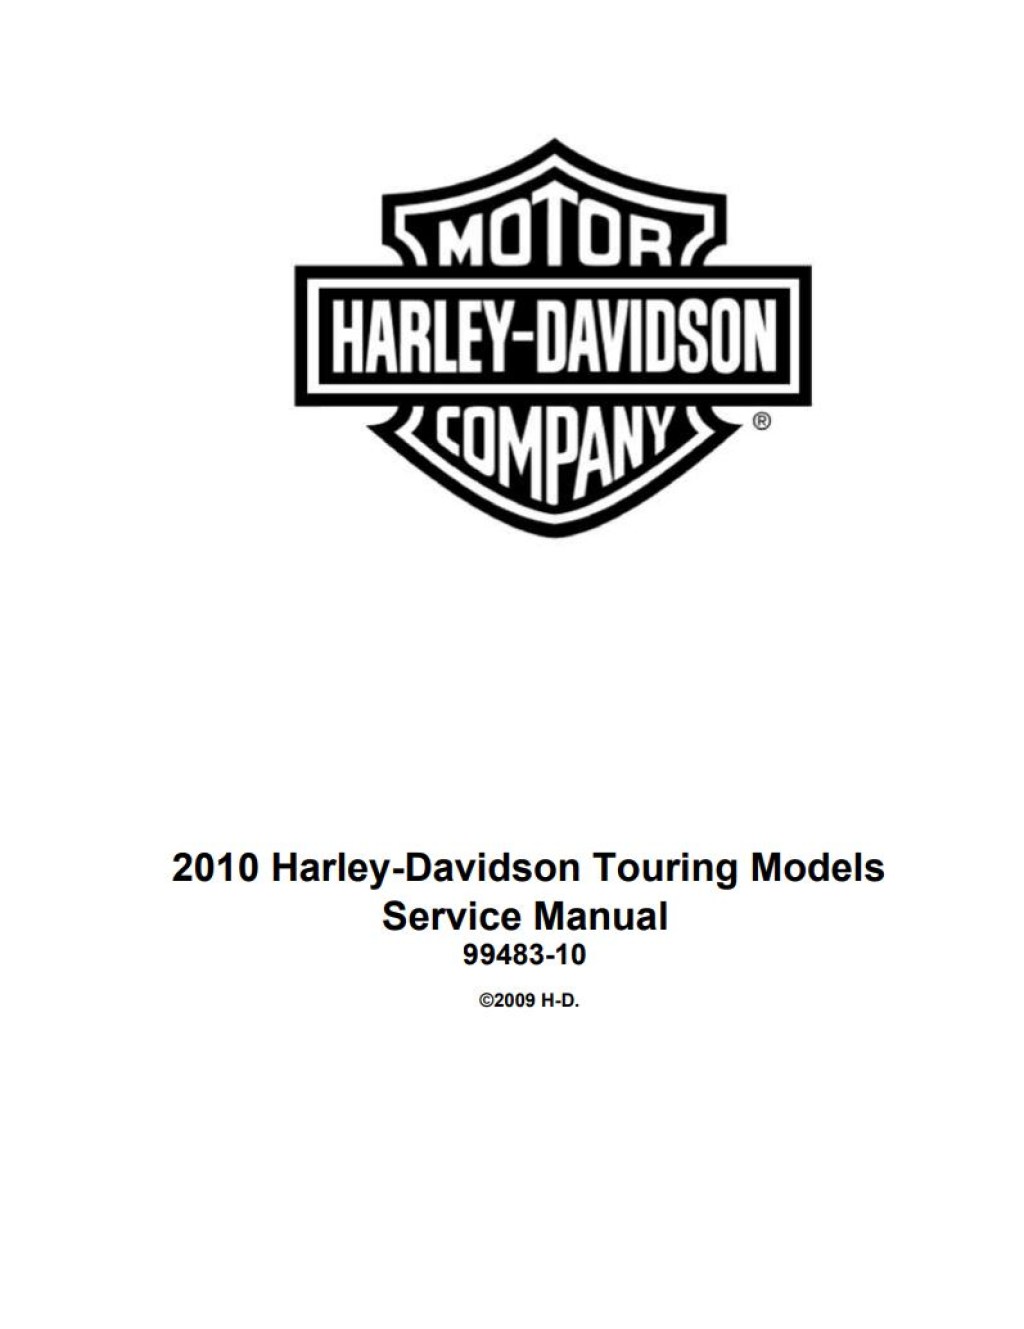 Picture of: Service manual  Harley-Davidson Touring Models, Electra Glide